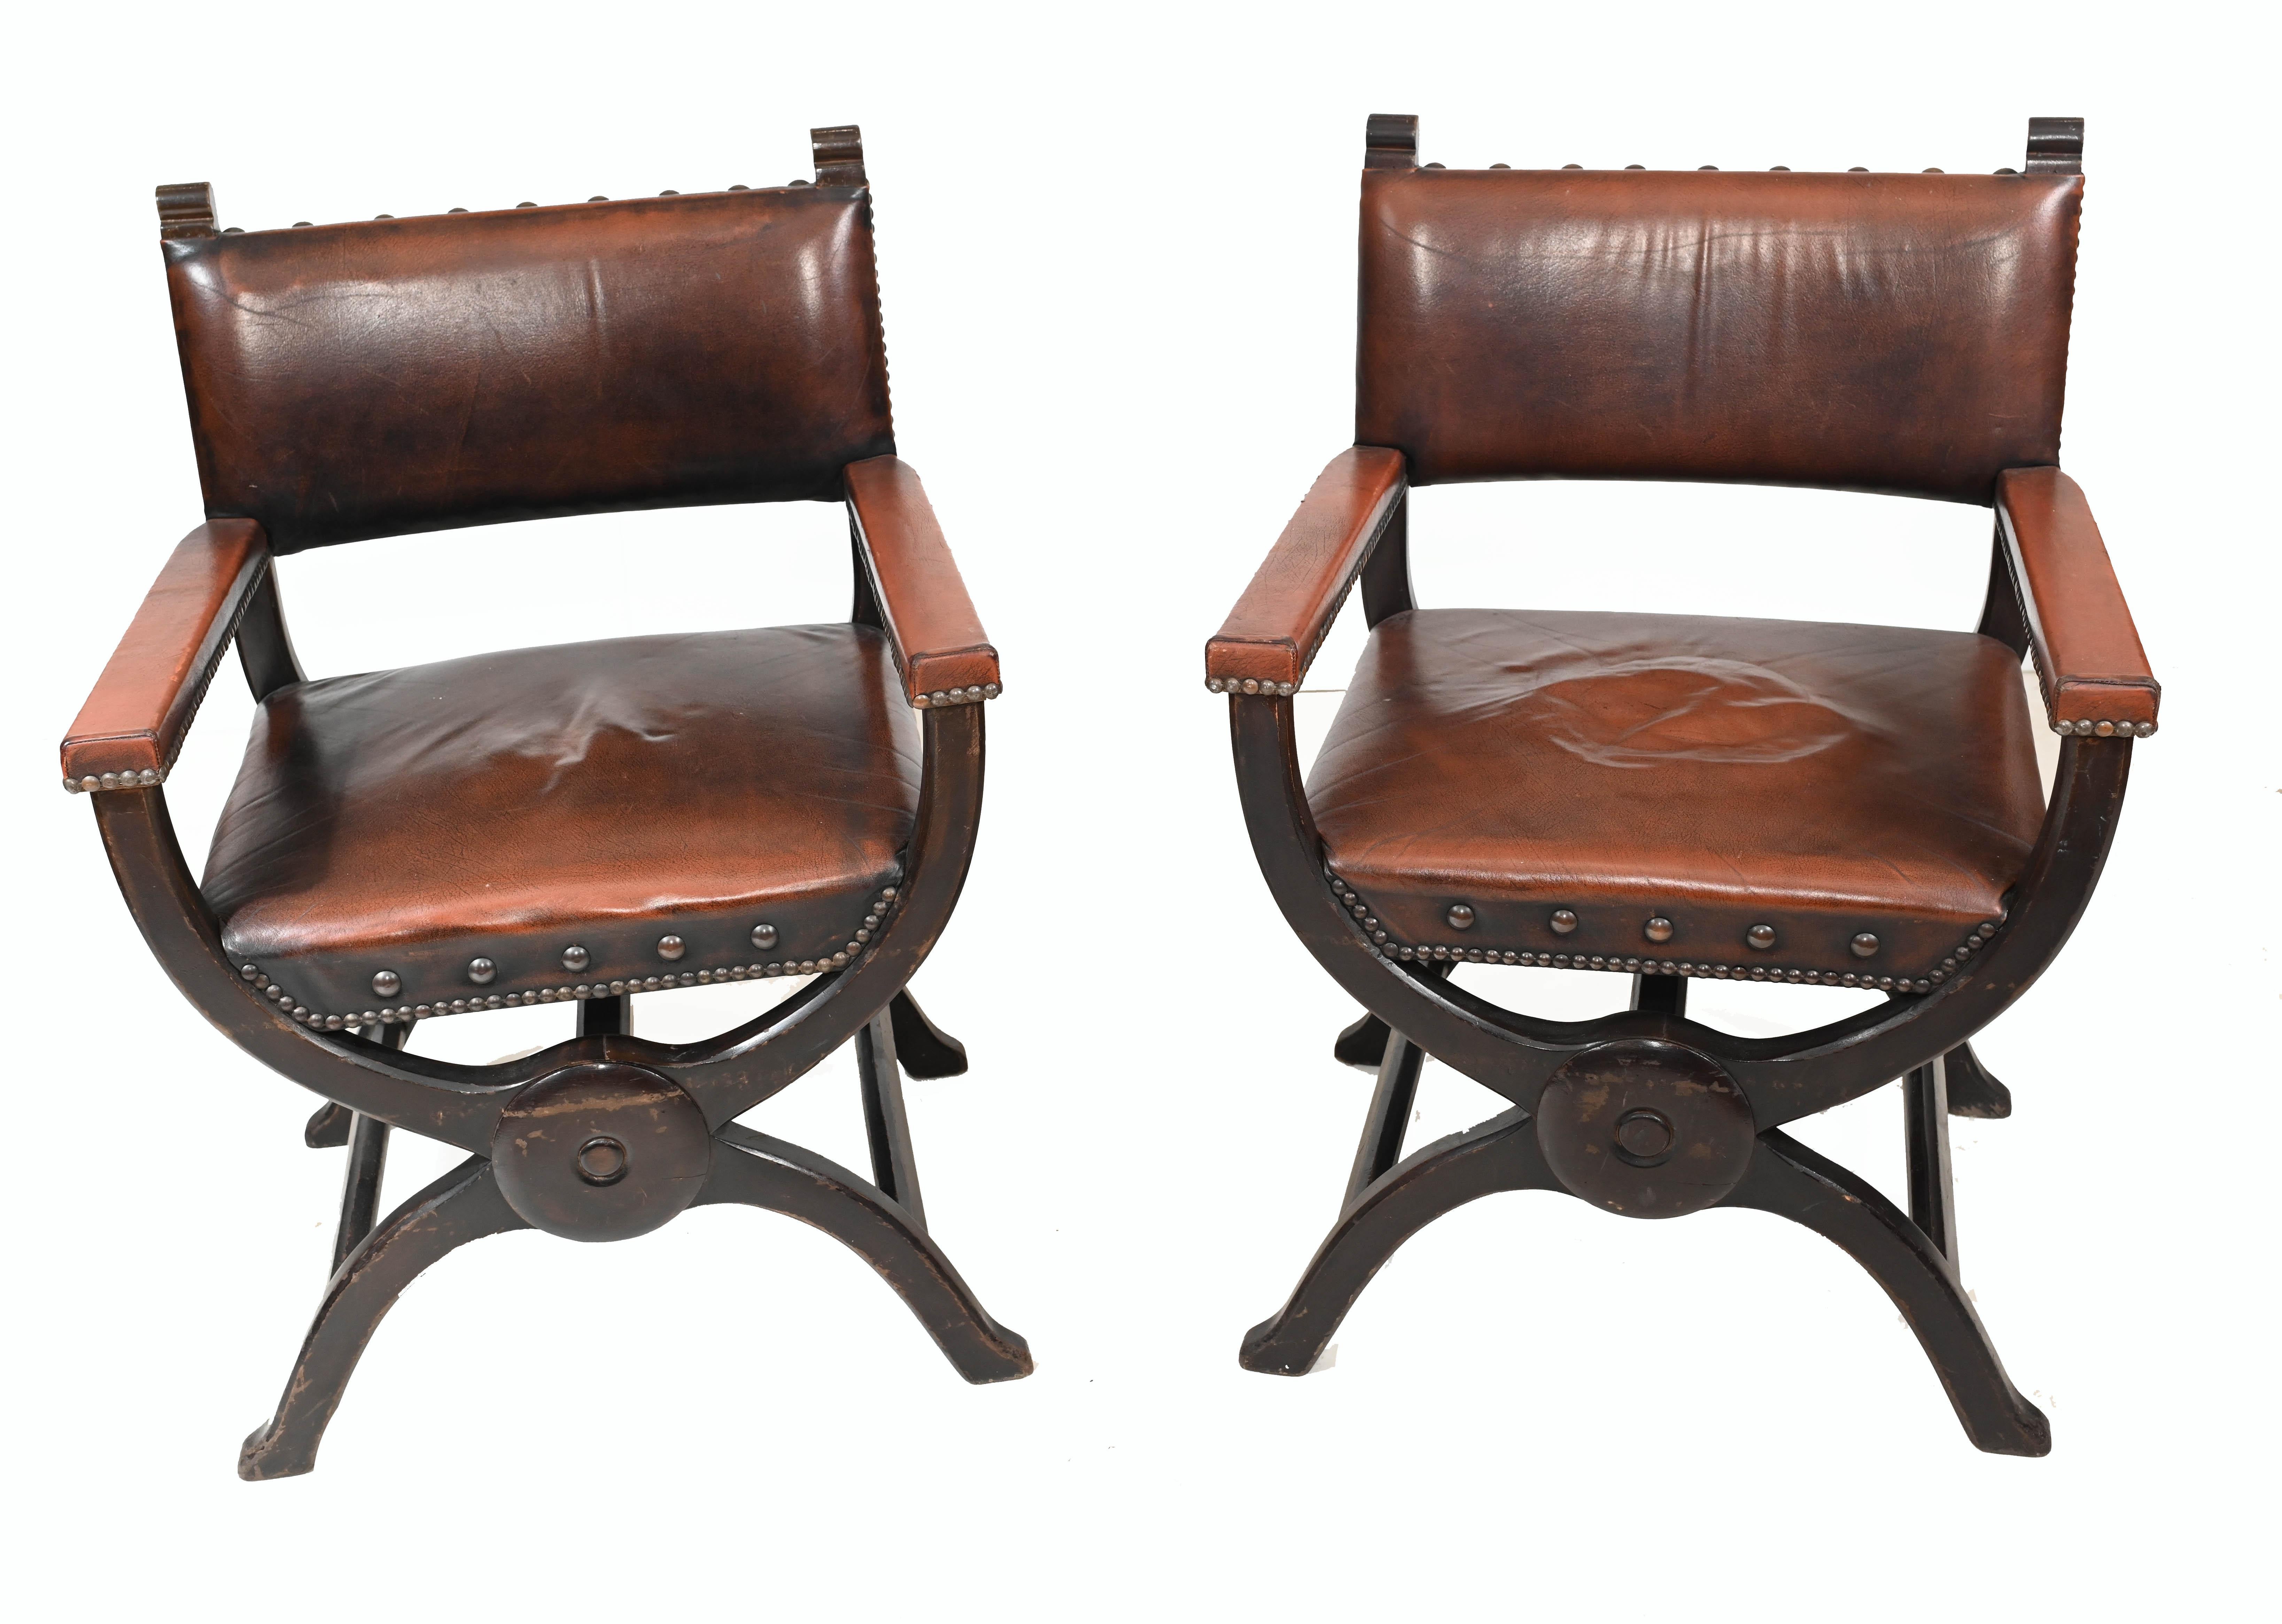 Pair antique Moroccan arm chairs with x frame design
Cool interiors pair with leather upholstery and cushioned arms
We date these leather chairs to circa 1920
Offered in great shape ready for home use right away
We ship to every corner of the